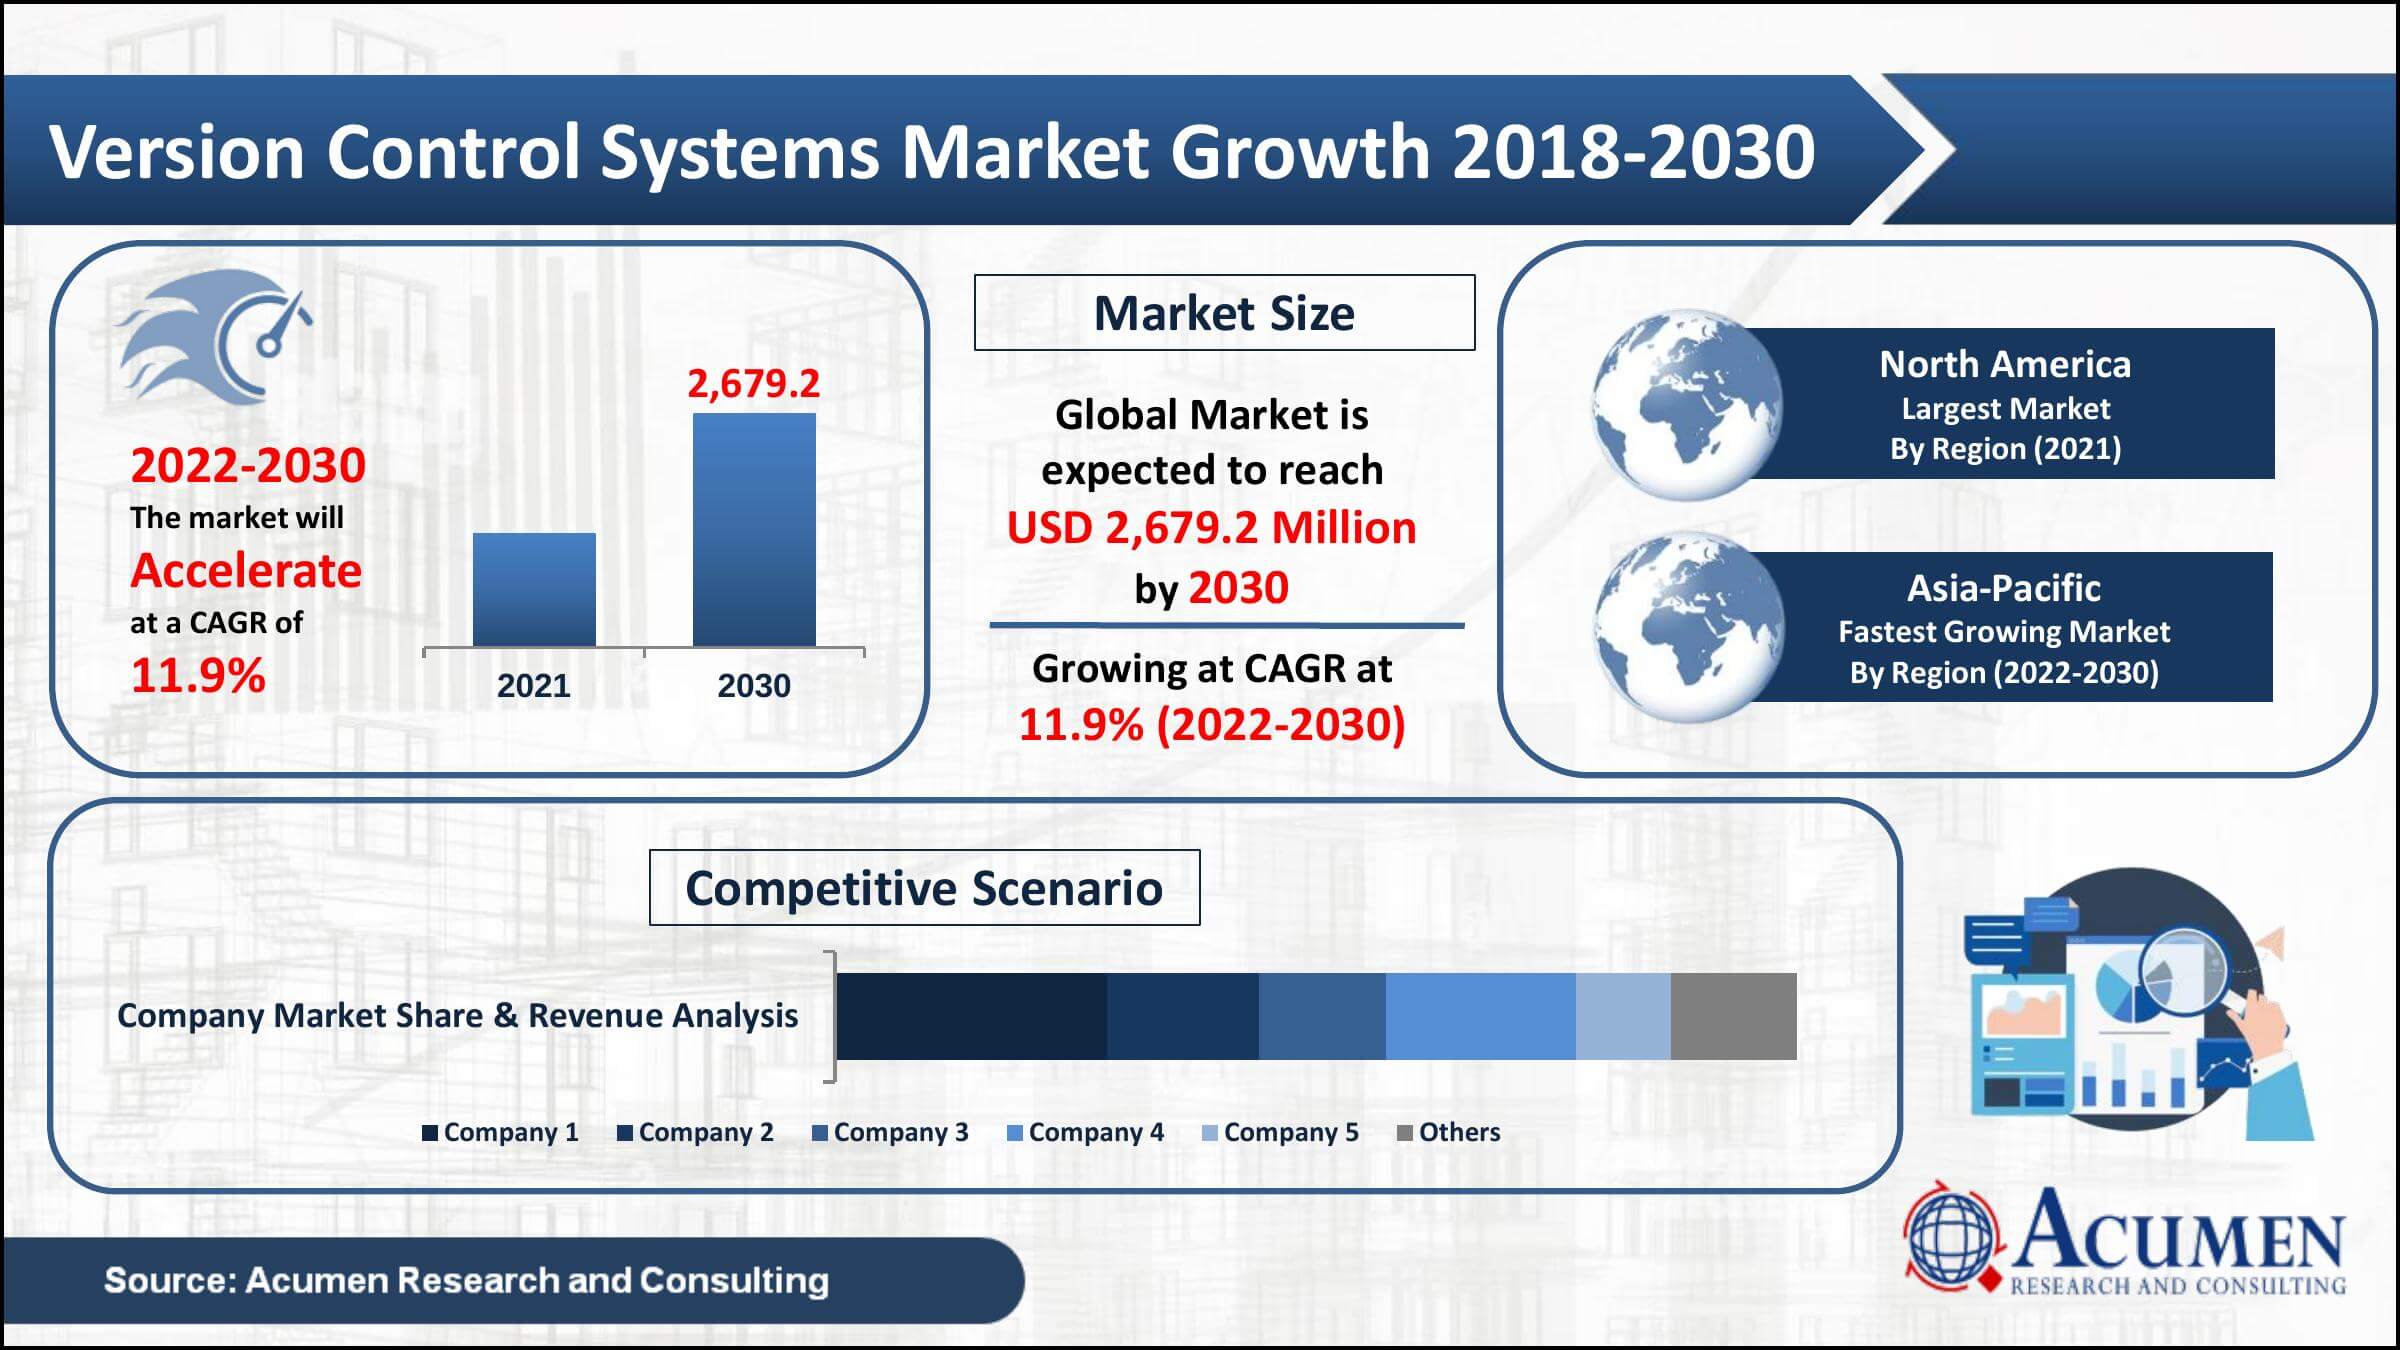 Version Control Systems Market value to reach USD 2,679.2 Million by 2030 at 11.9% CAGR